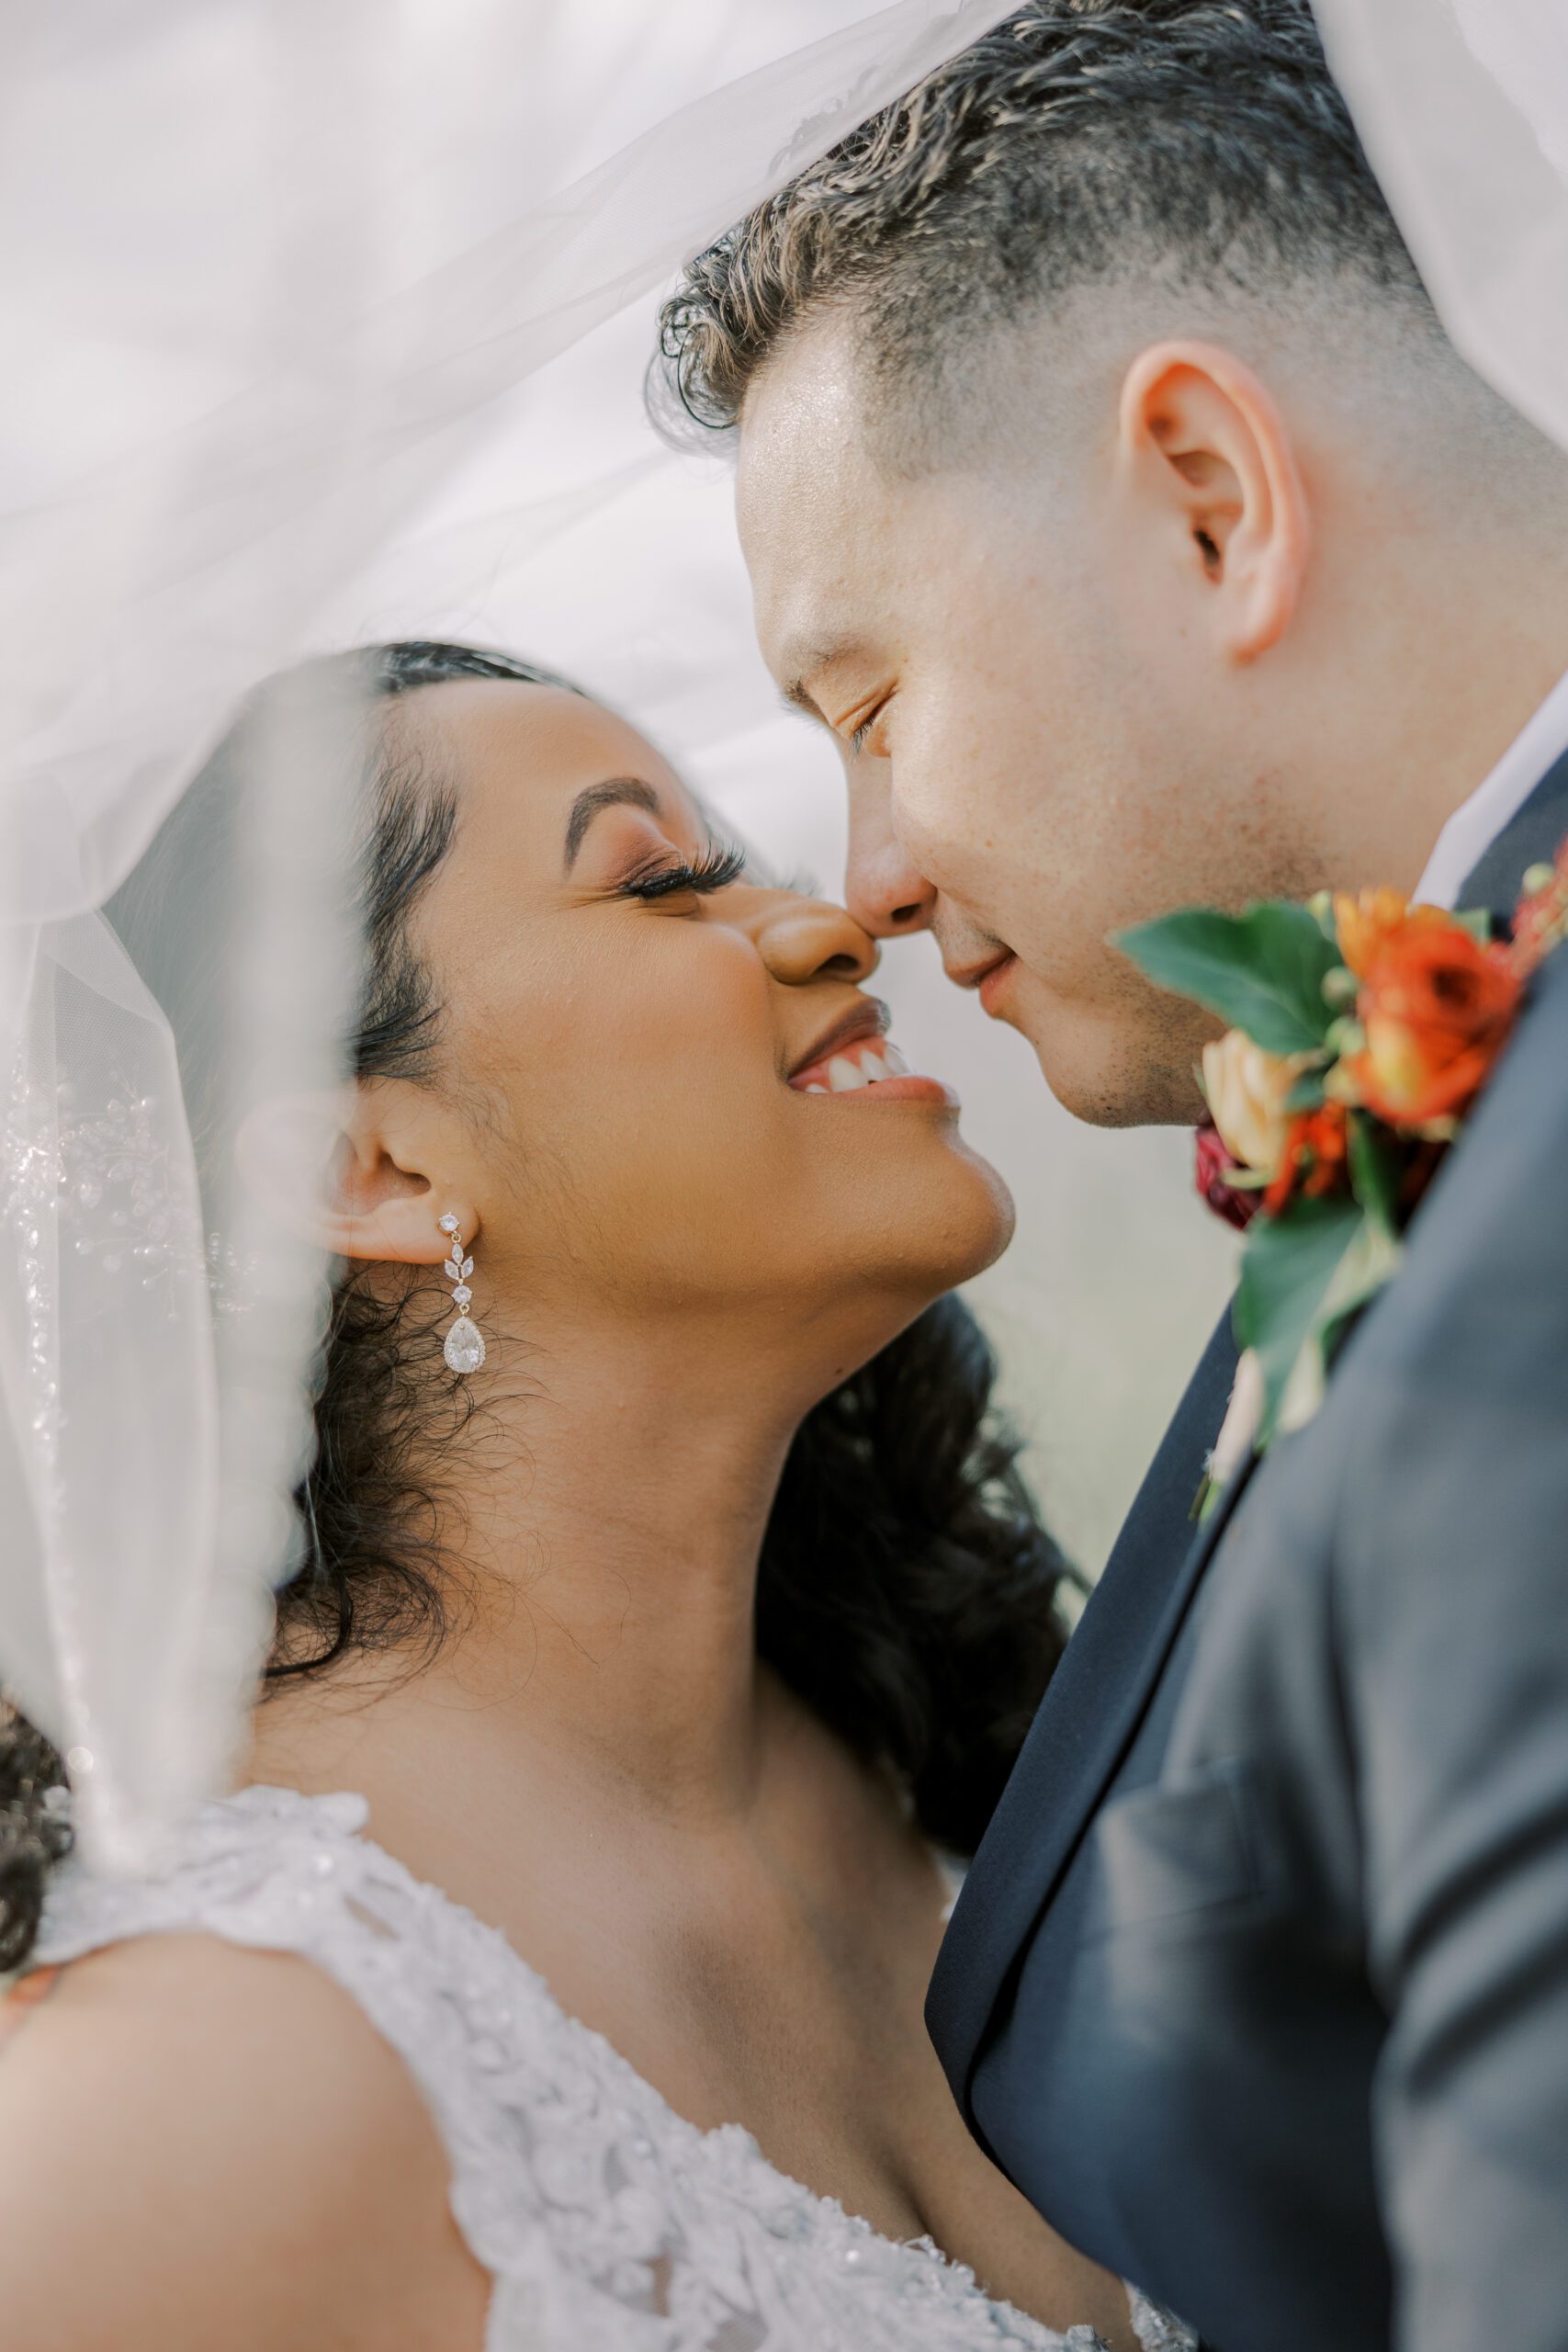 Close up image of bride and groom touching noses and smiling, bride's veil over both of their heads